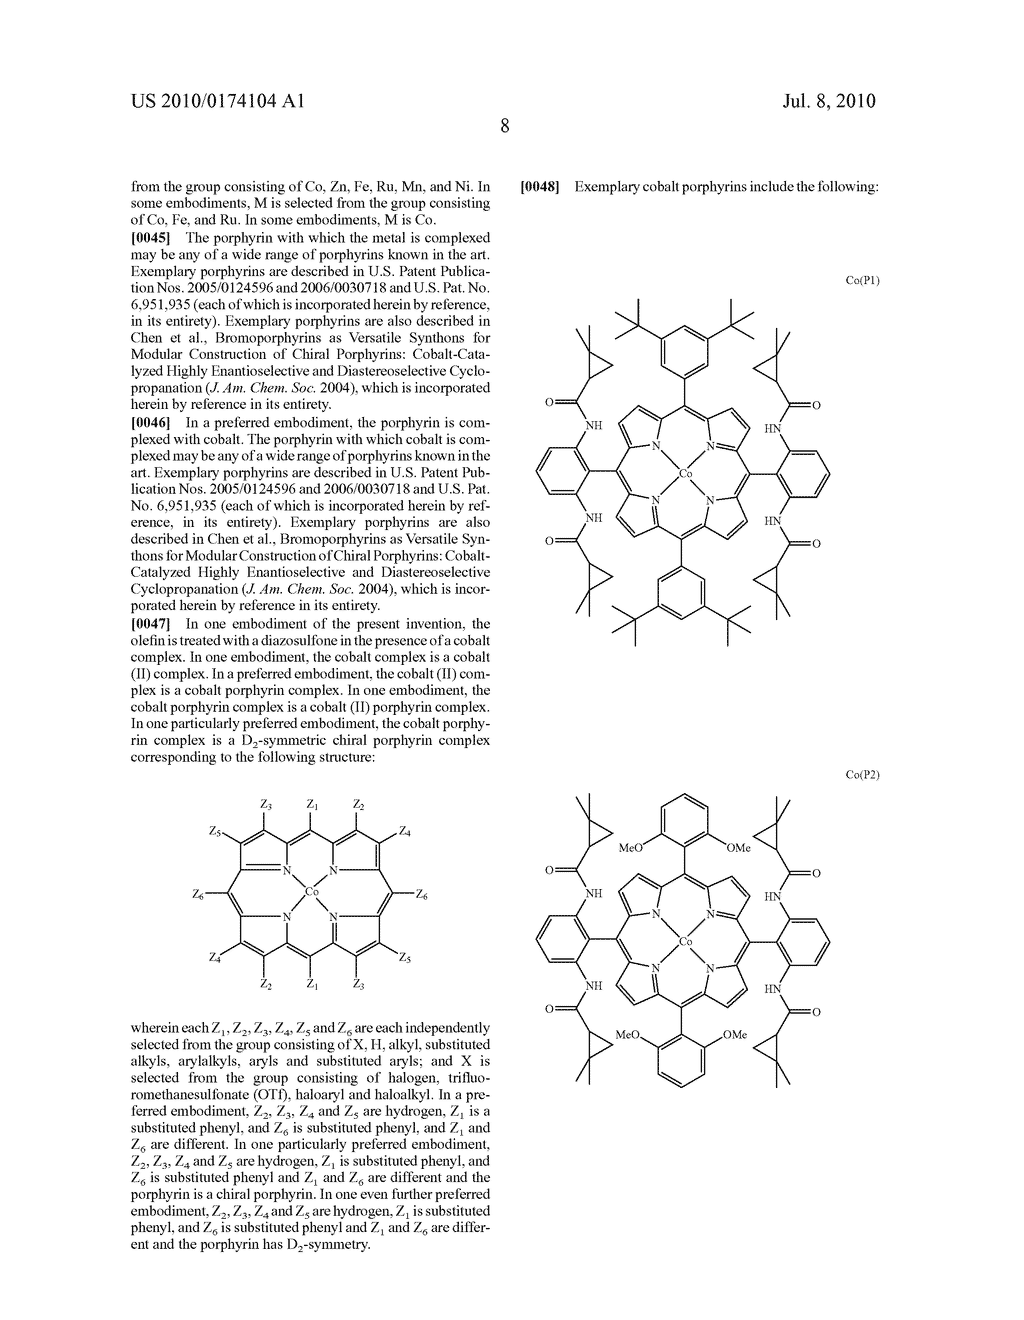 COBALT-CATALYZED ASYMMETRIC CYCLOPROPANATION WITH DIAZOSULFONES - diagram, schematic, and image 15